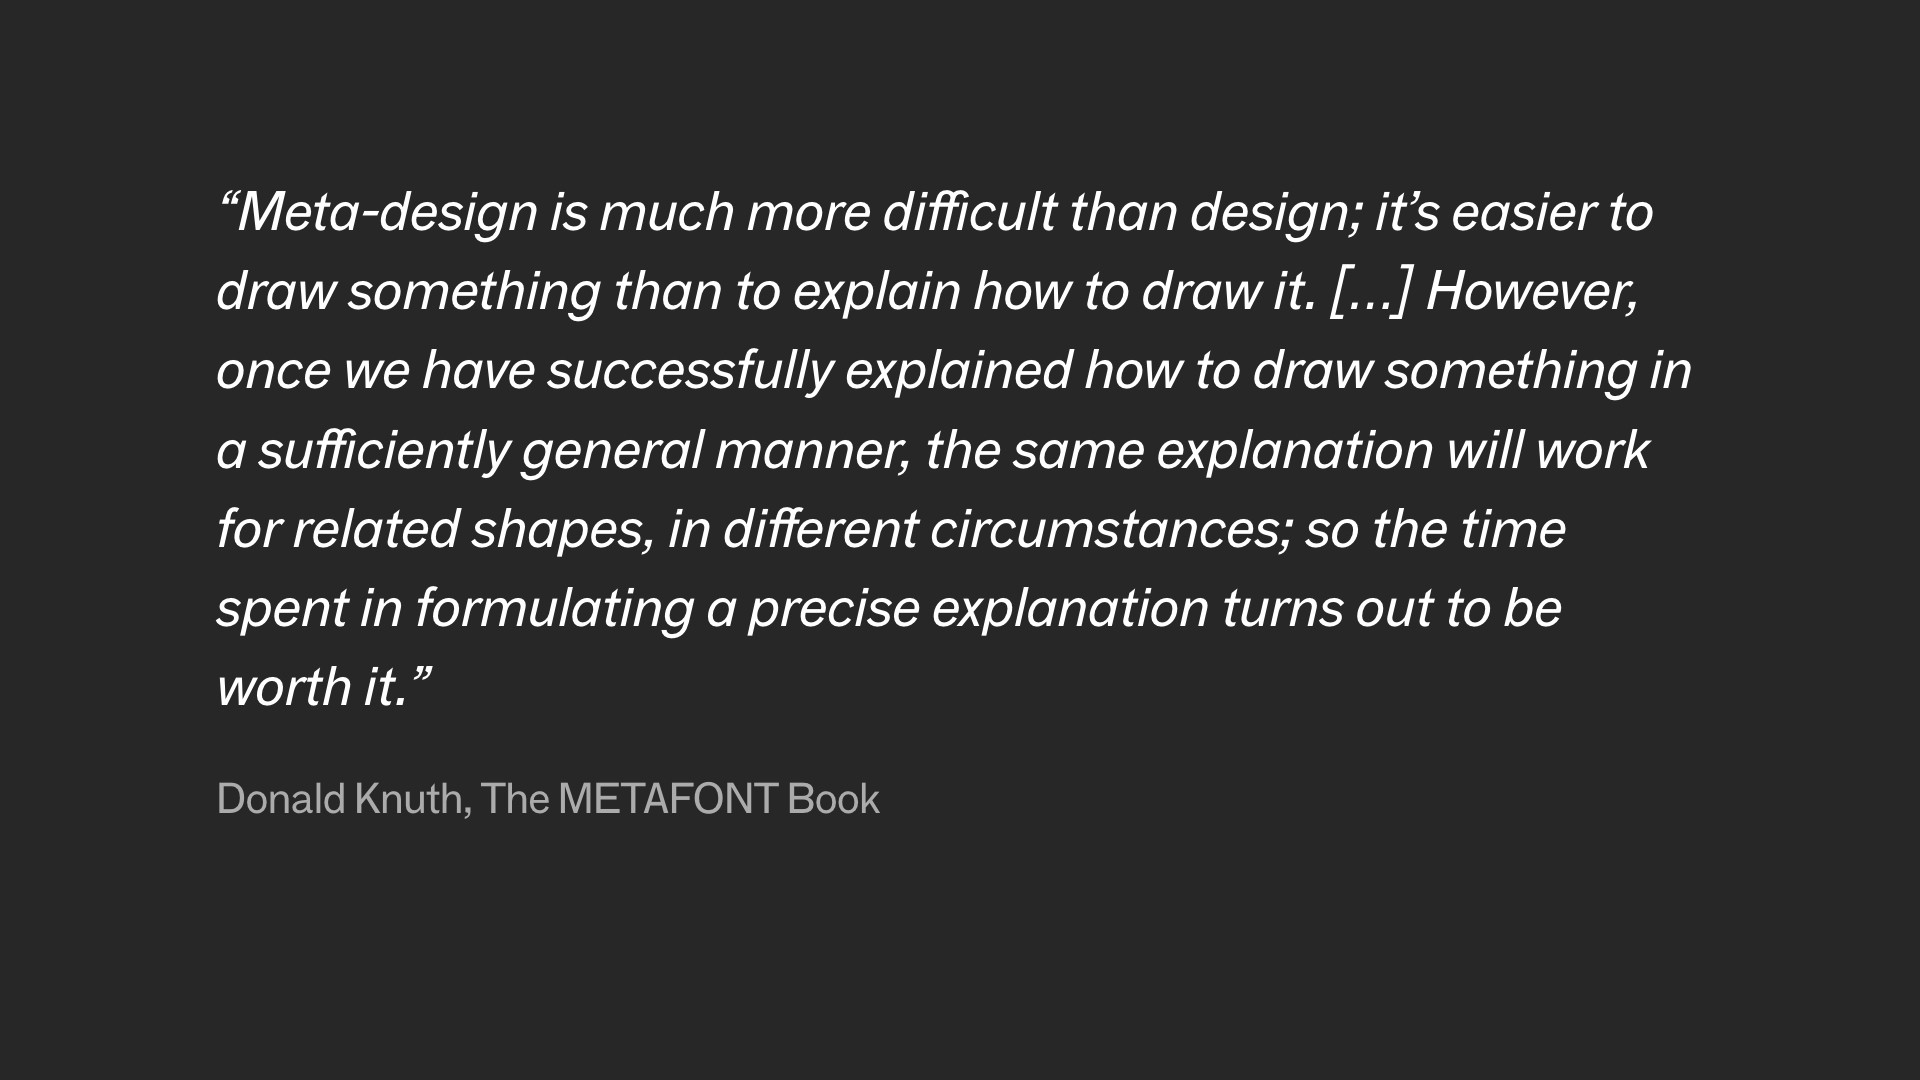 Quote shows on screen. 'Meta-design is much more difficult than design; it's easier to draw something than to explain ho to draw it. [...] However, once we have successfully explained how to draw something in a sufficiently general manner, the same explanation will work for related shapes, in different circumstances; so the time spent in formulating a precise explanation turns out to be worth it.' By Donald Knuth, The METAFONT Book.